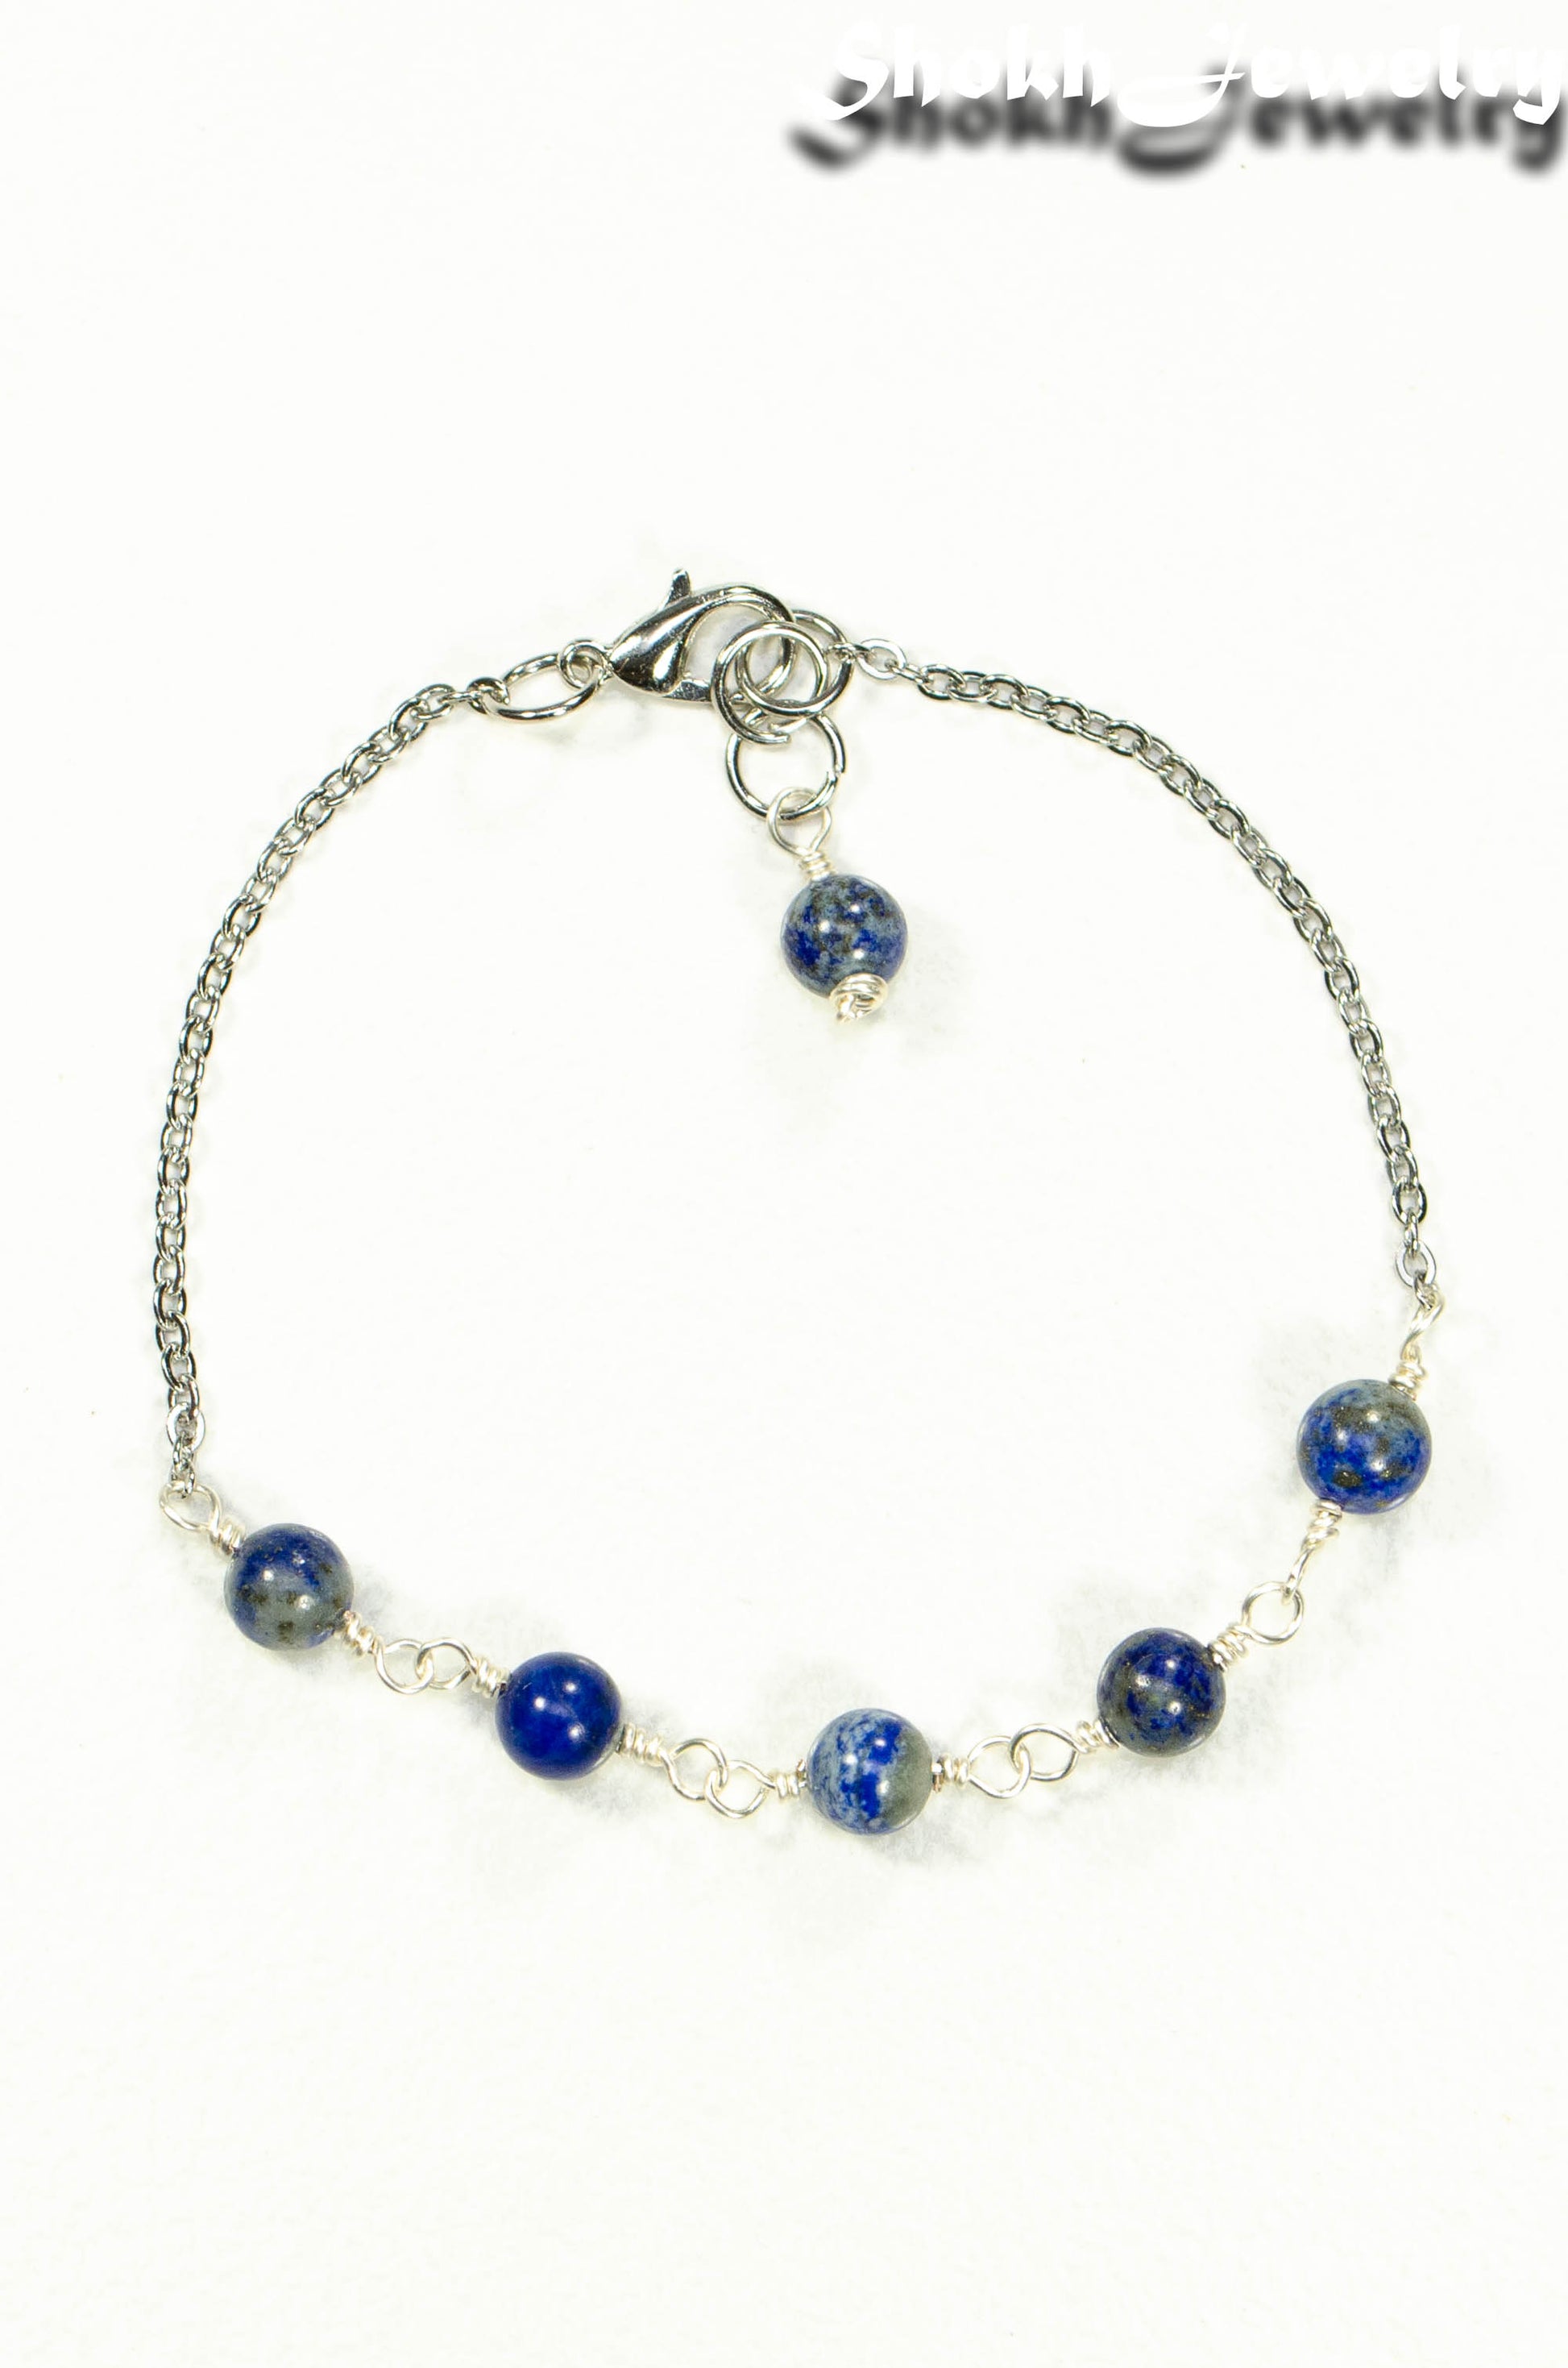 Top view of Lapis Lazuli and Stainless Steel Chain Anklet.